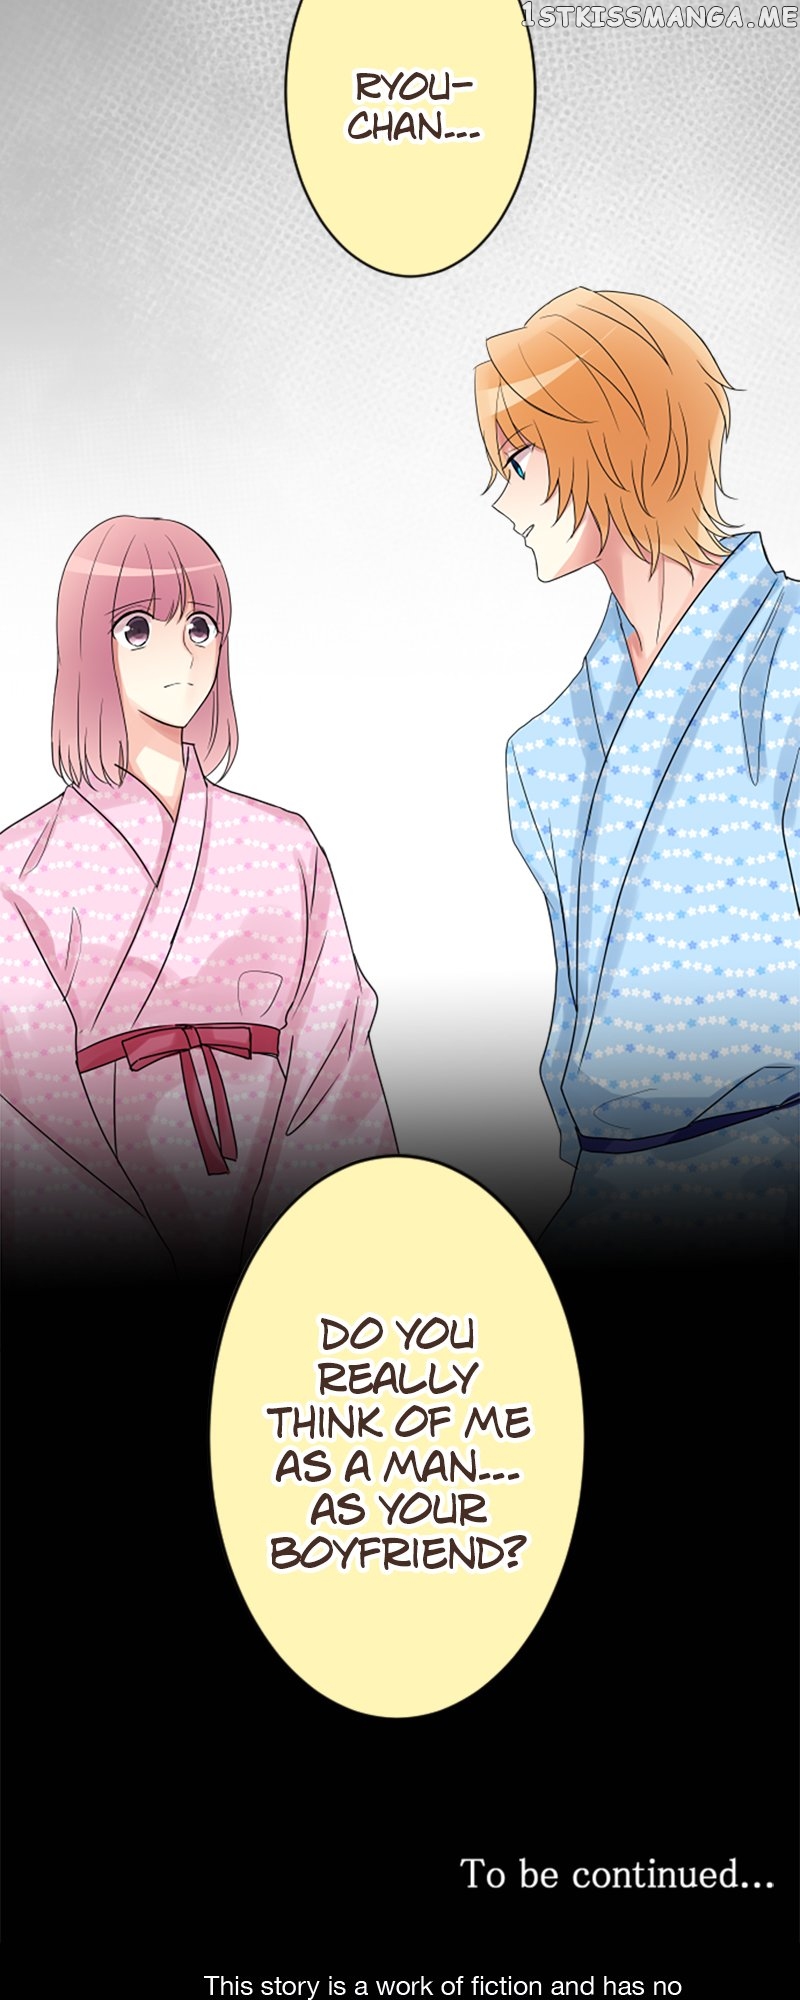 Next to You ~The Story of a Couple with a Huge Age Difference~ Chapter 87 - p2.3 - page 25